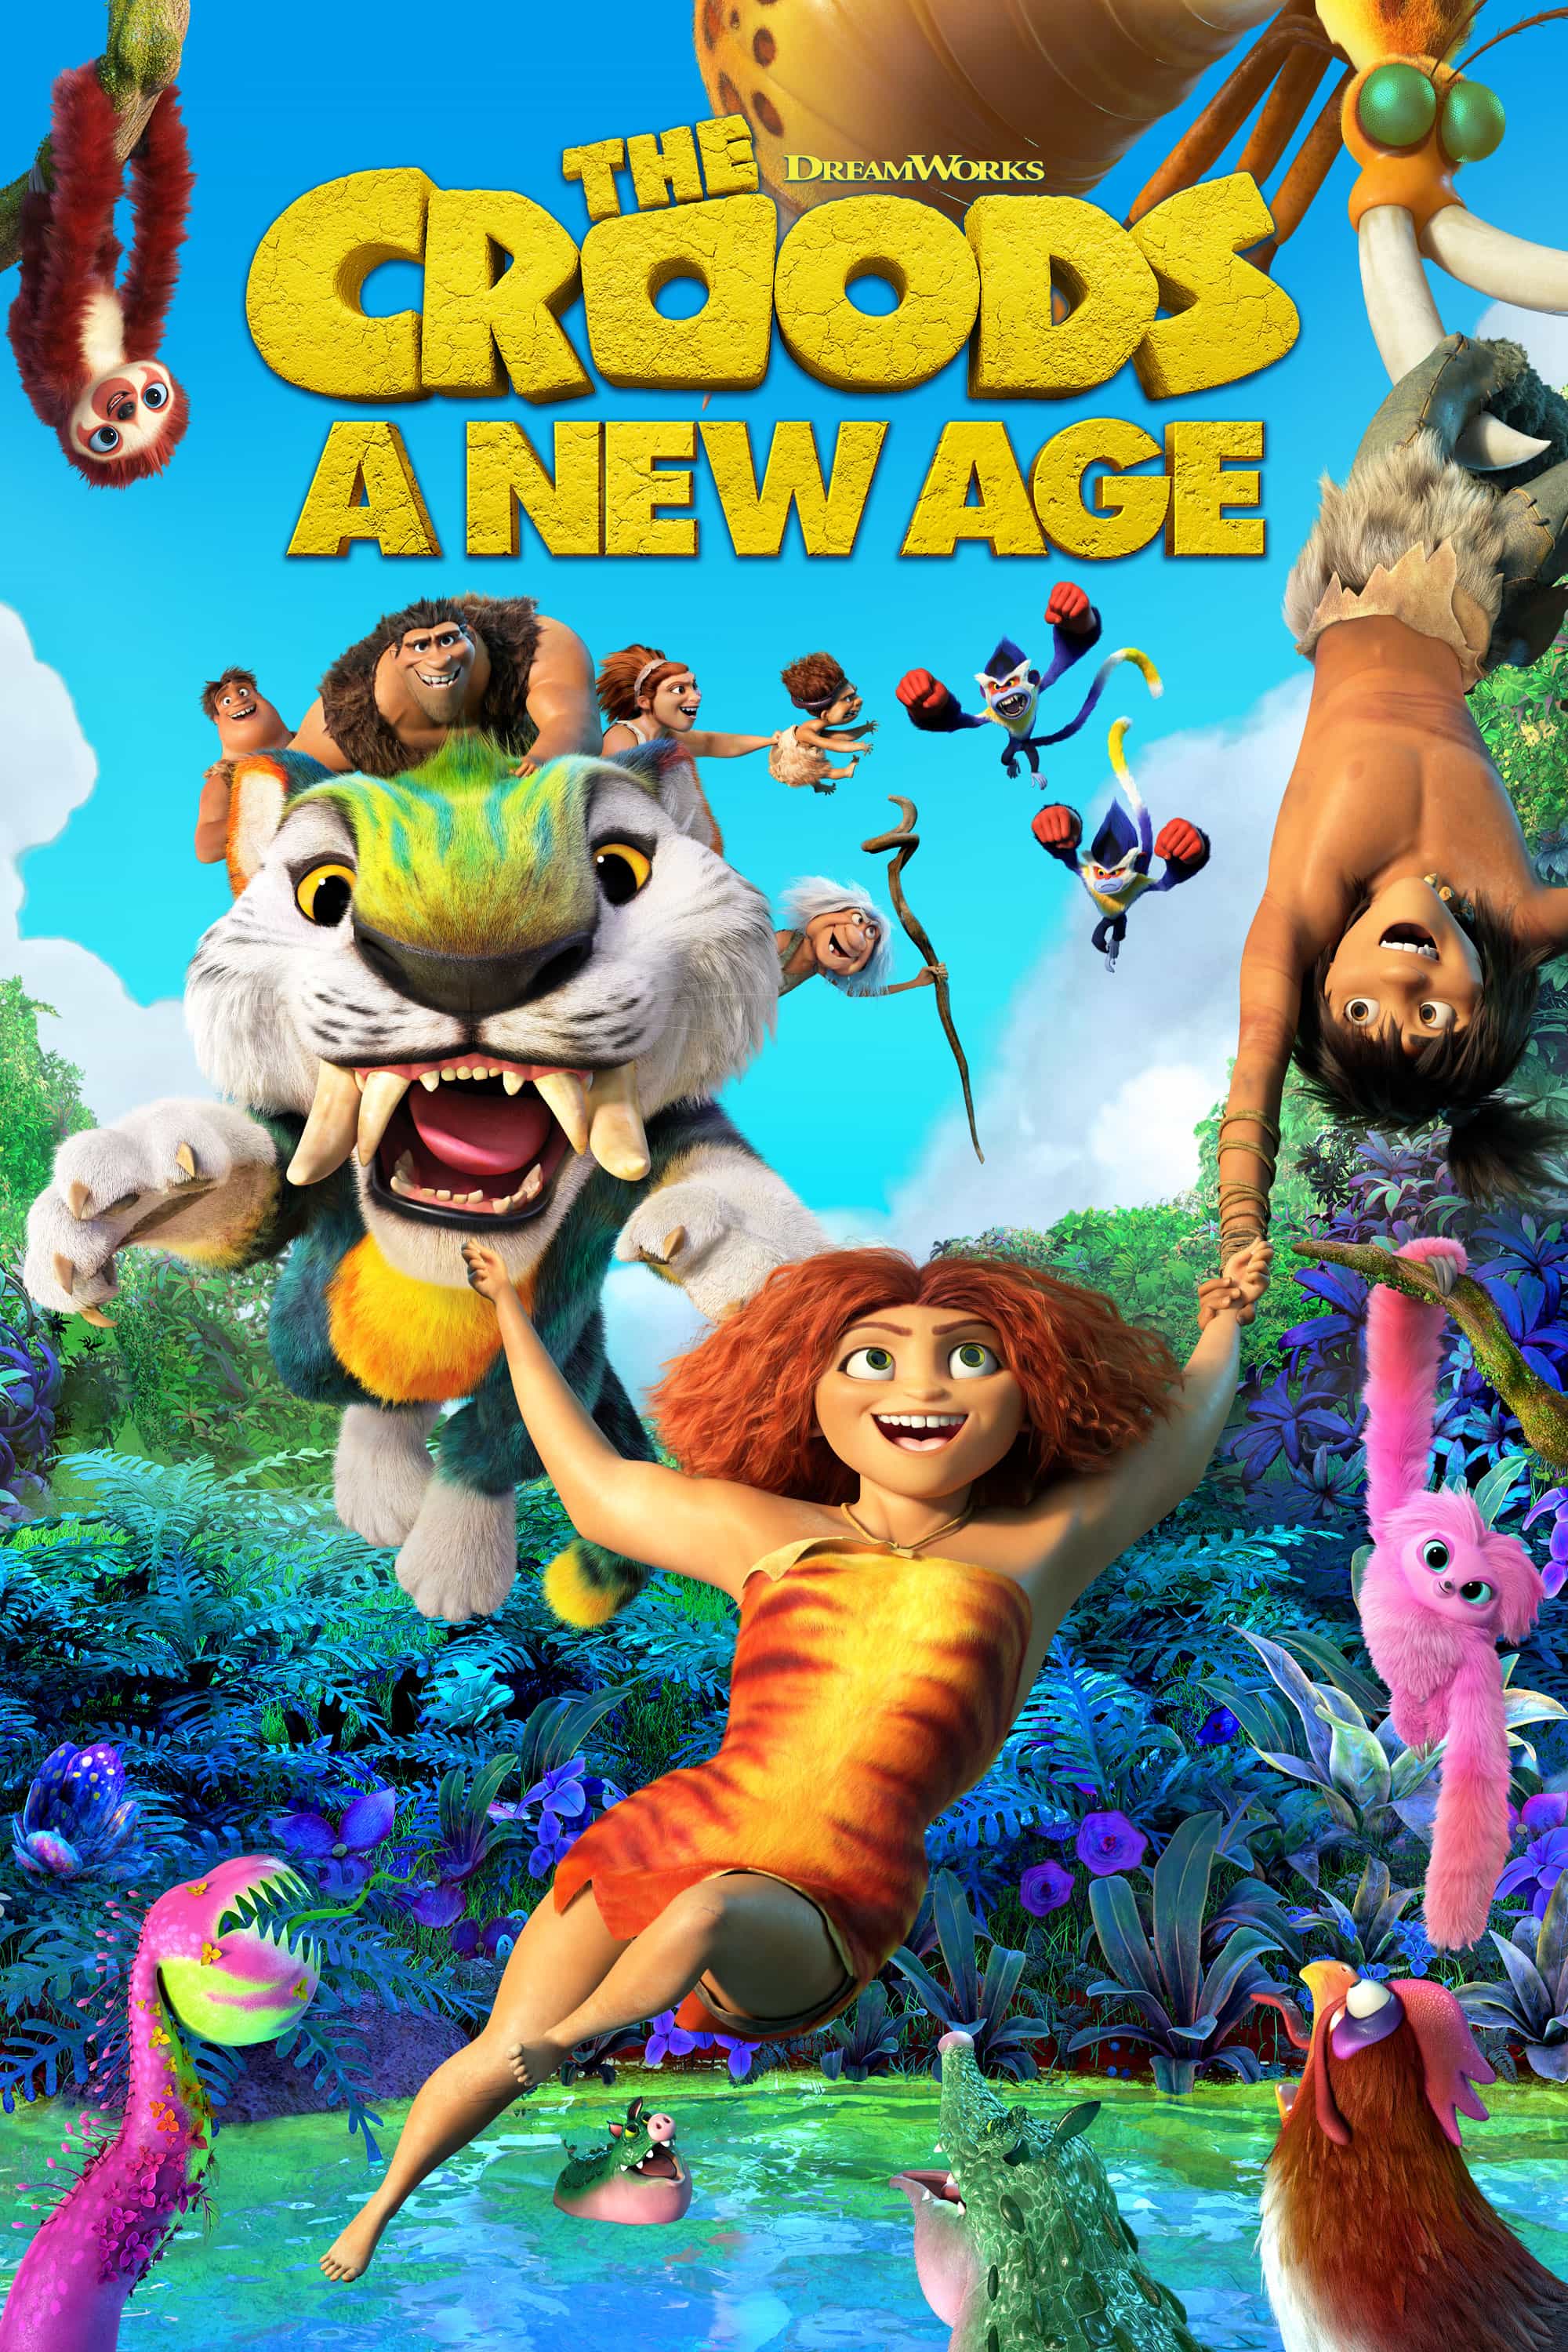 New poster release for The Croods A New Age starring Nicolas Cage - movie release date 29th January 2021